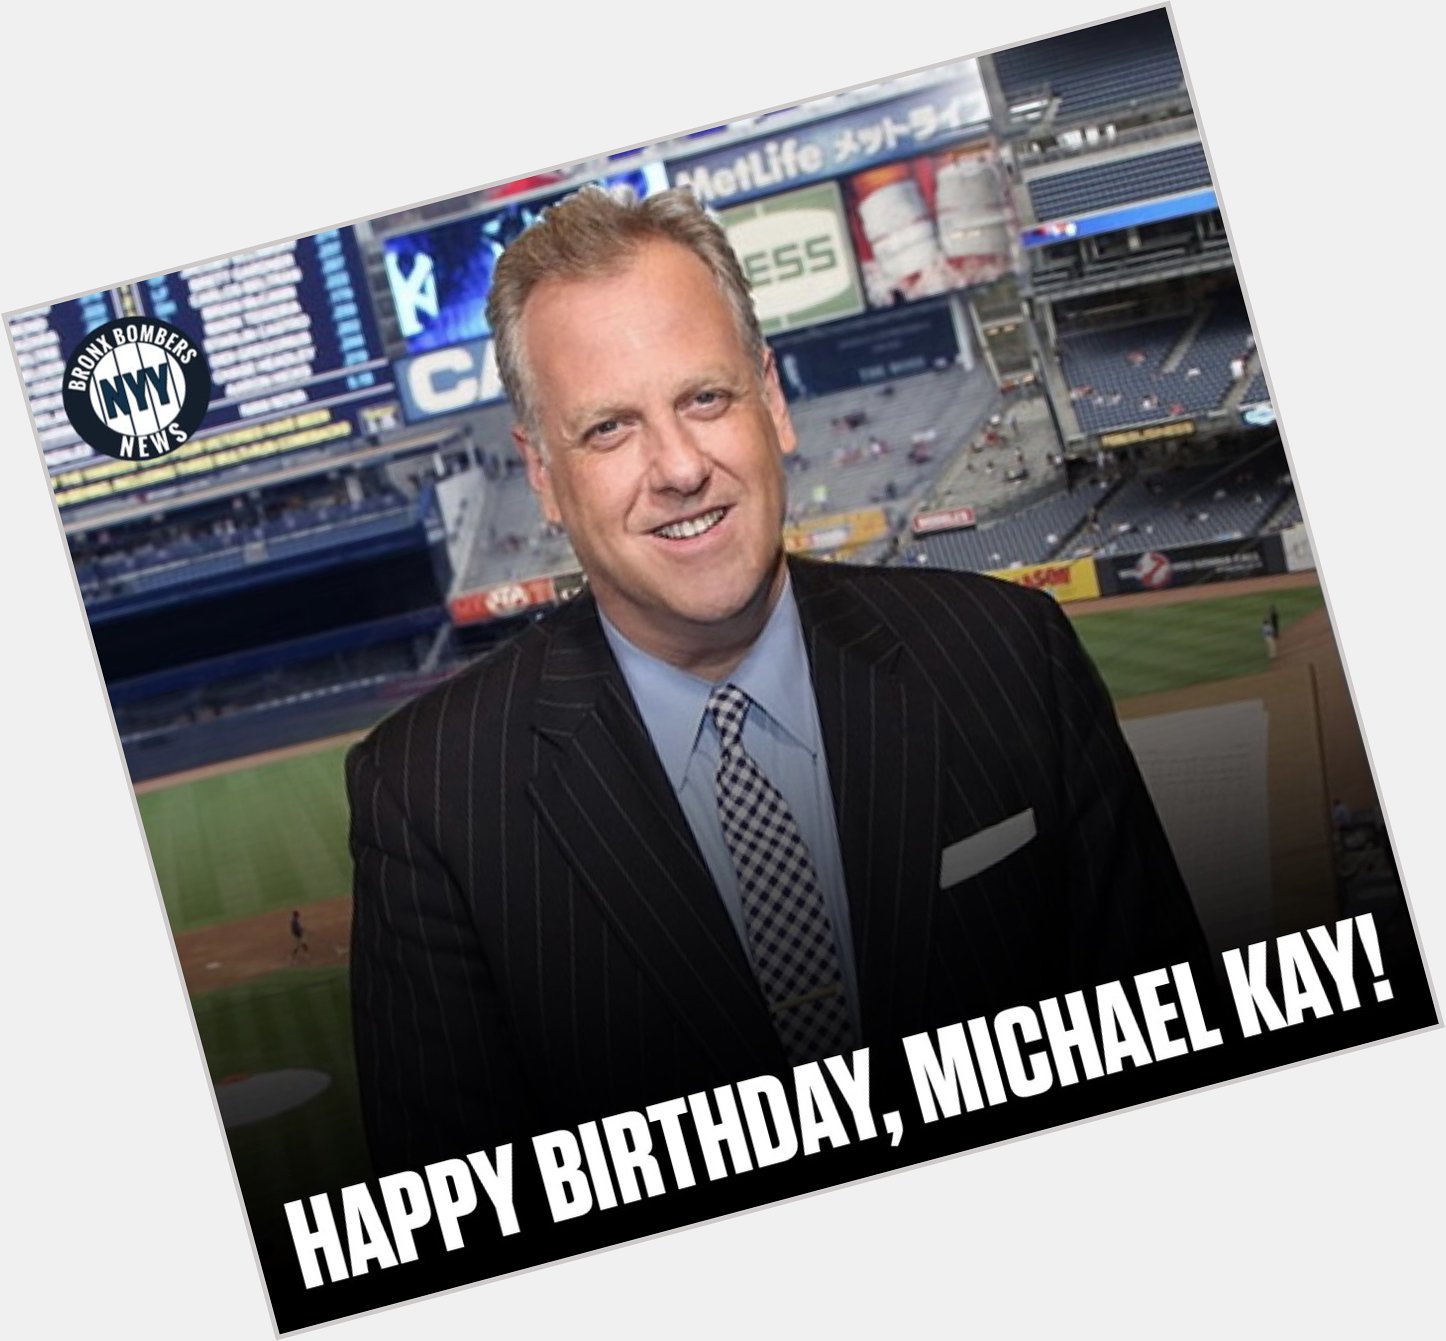 Happy birthday to play-by-play broadcaster, Michael Kay! He turned 60 years old today. 